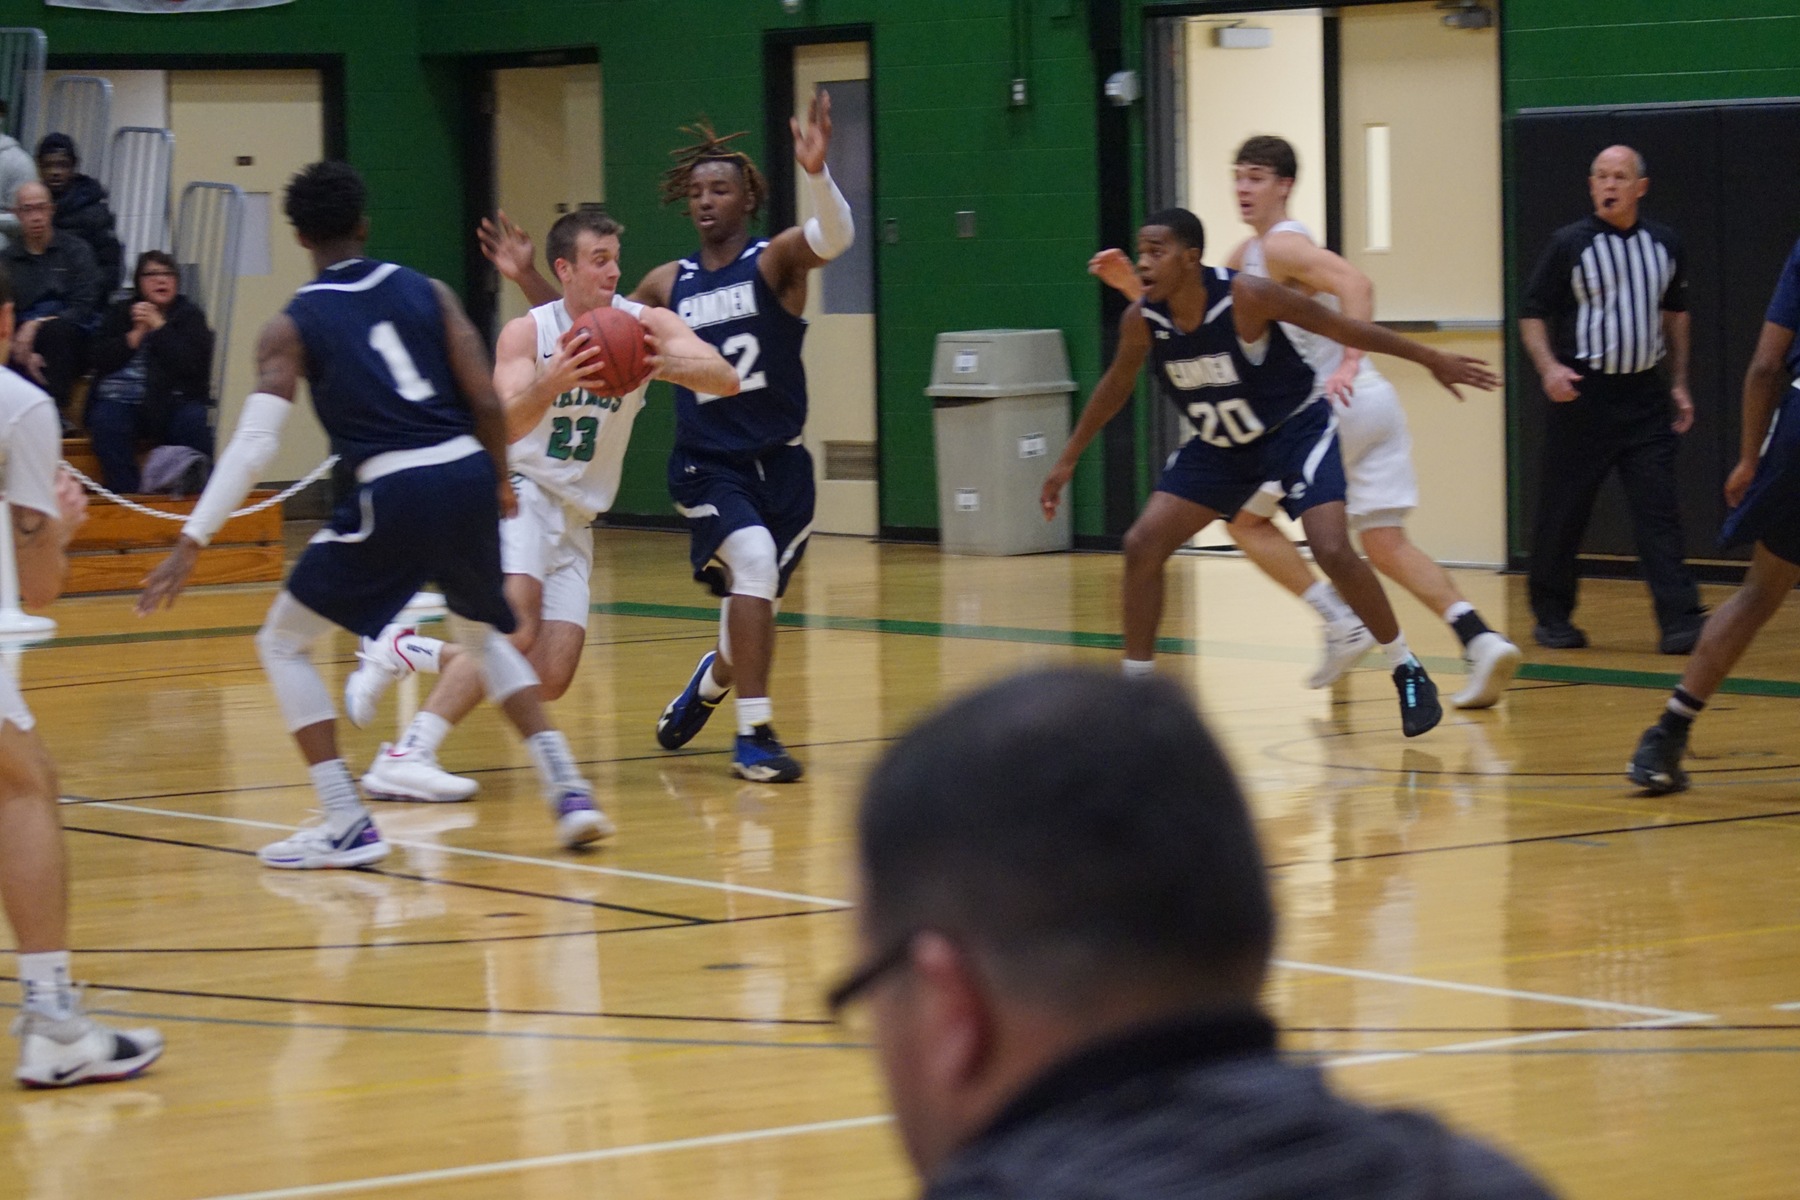 OCC Men's Hoops Come From Behind to Defeat RCSJ - Gloucester, 77-72